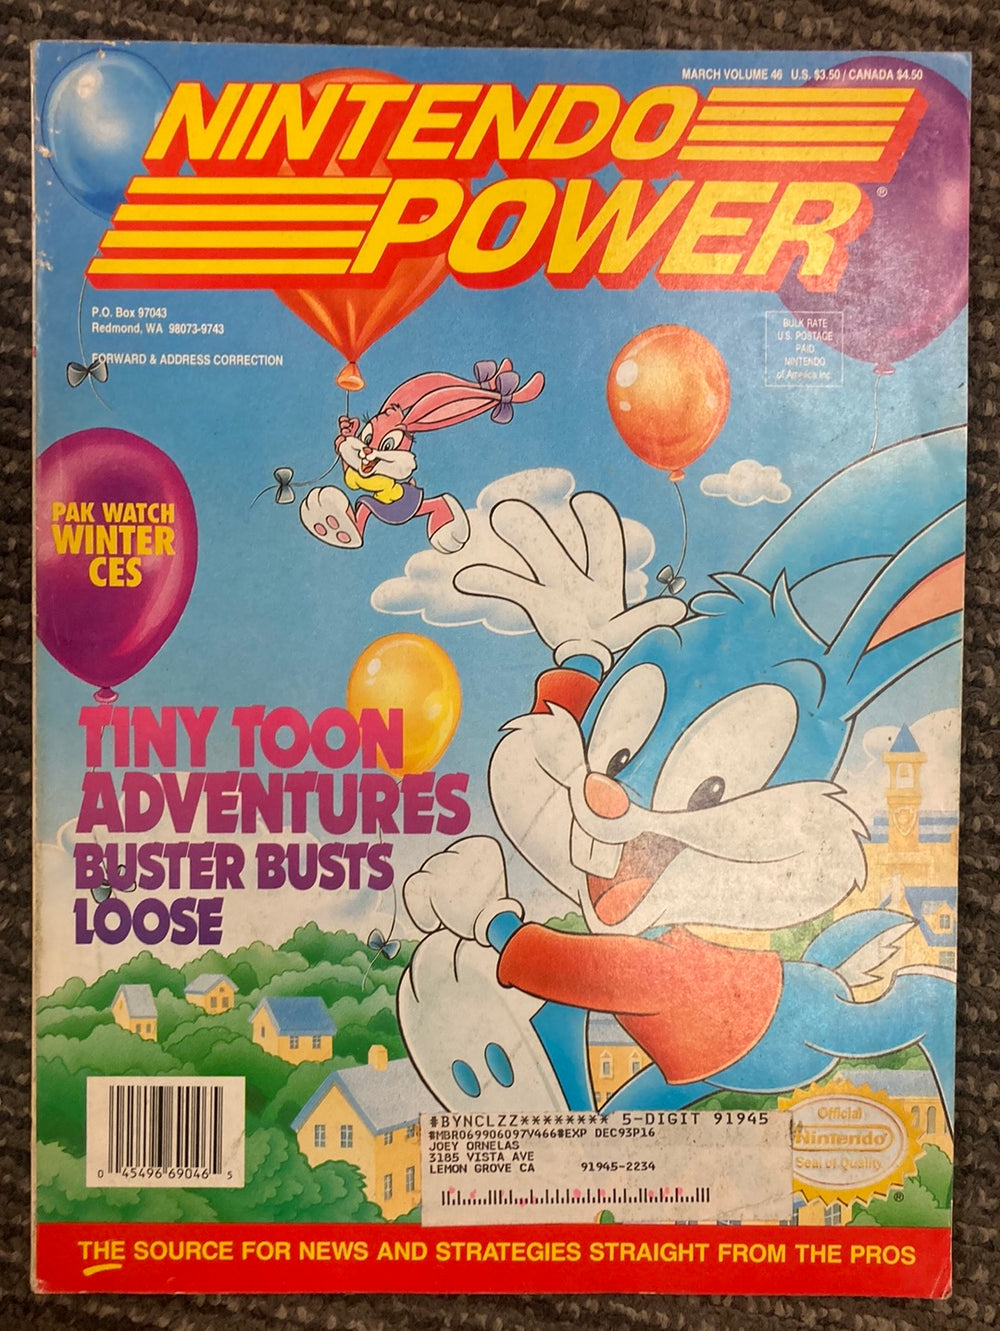 Nintendo Power Volume 46 (with poster)